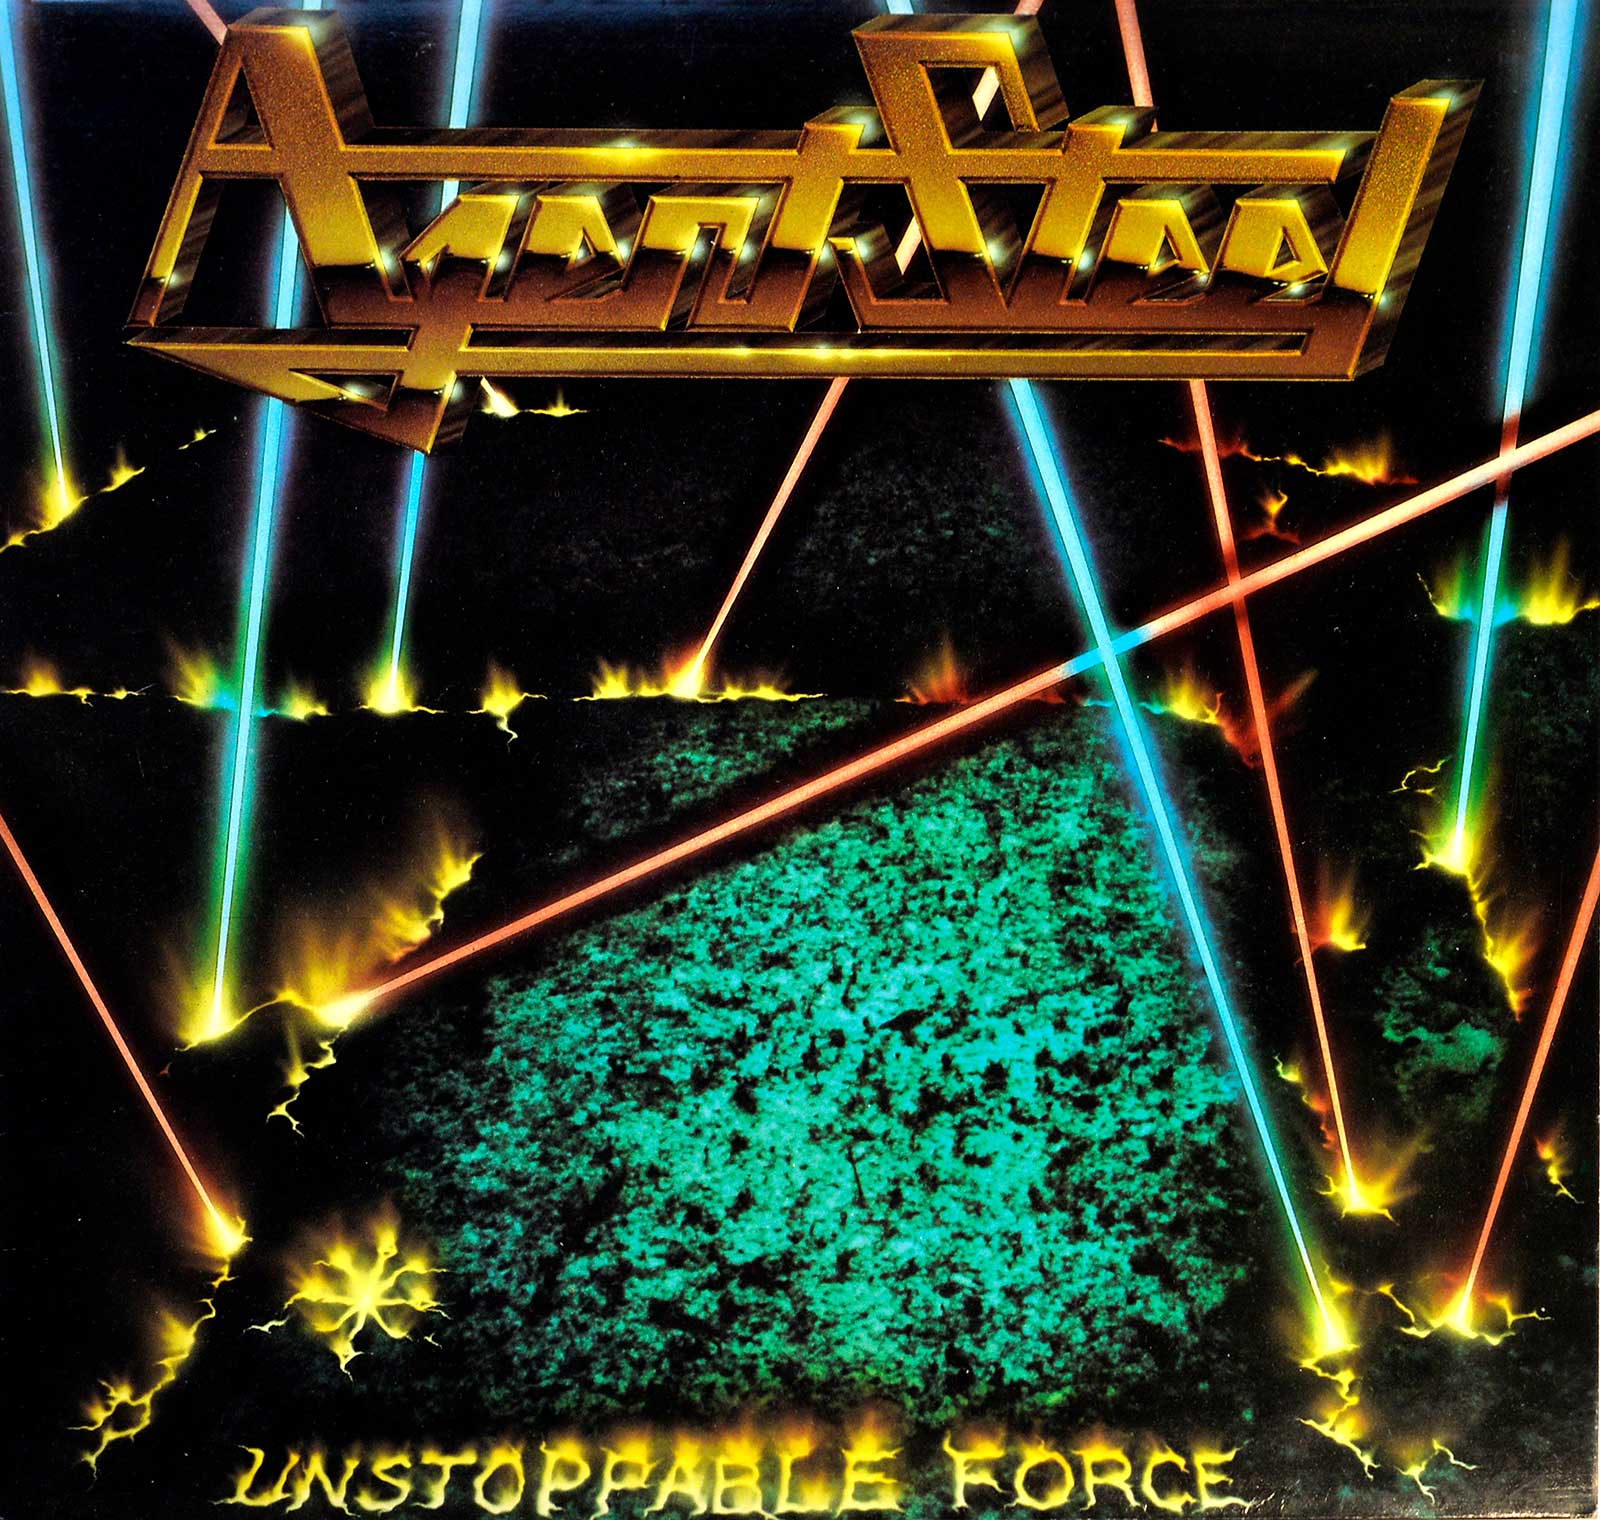 large photo of the album front cover of: AGENT STEEL Unstoppable Force UK MFN 